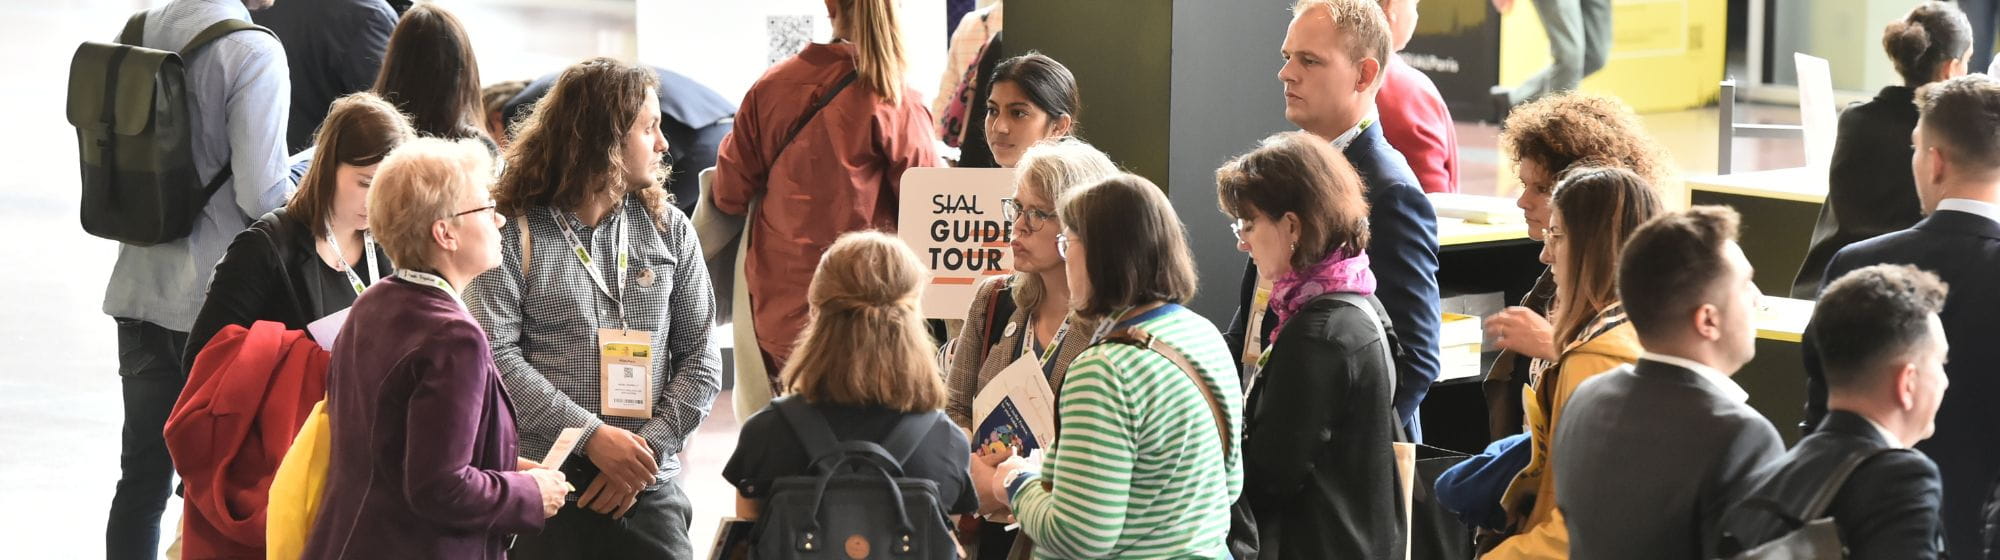 SIAL Paris guided tours